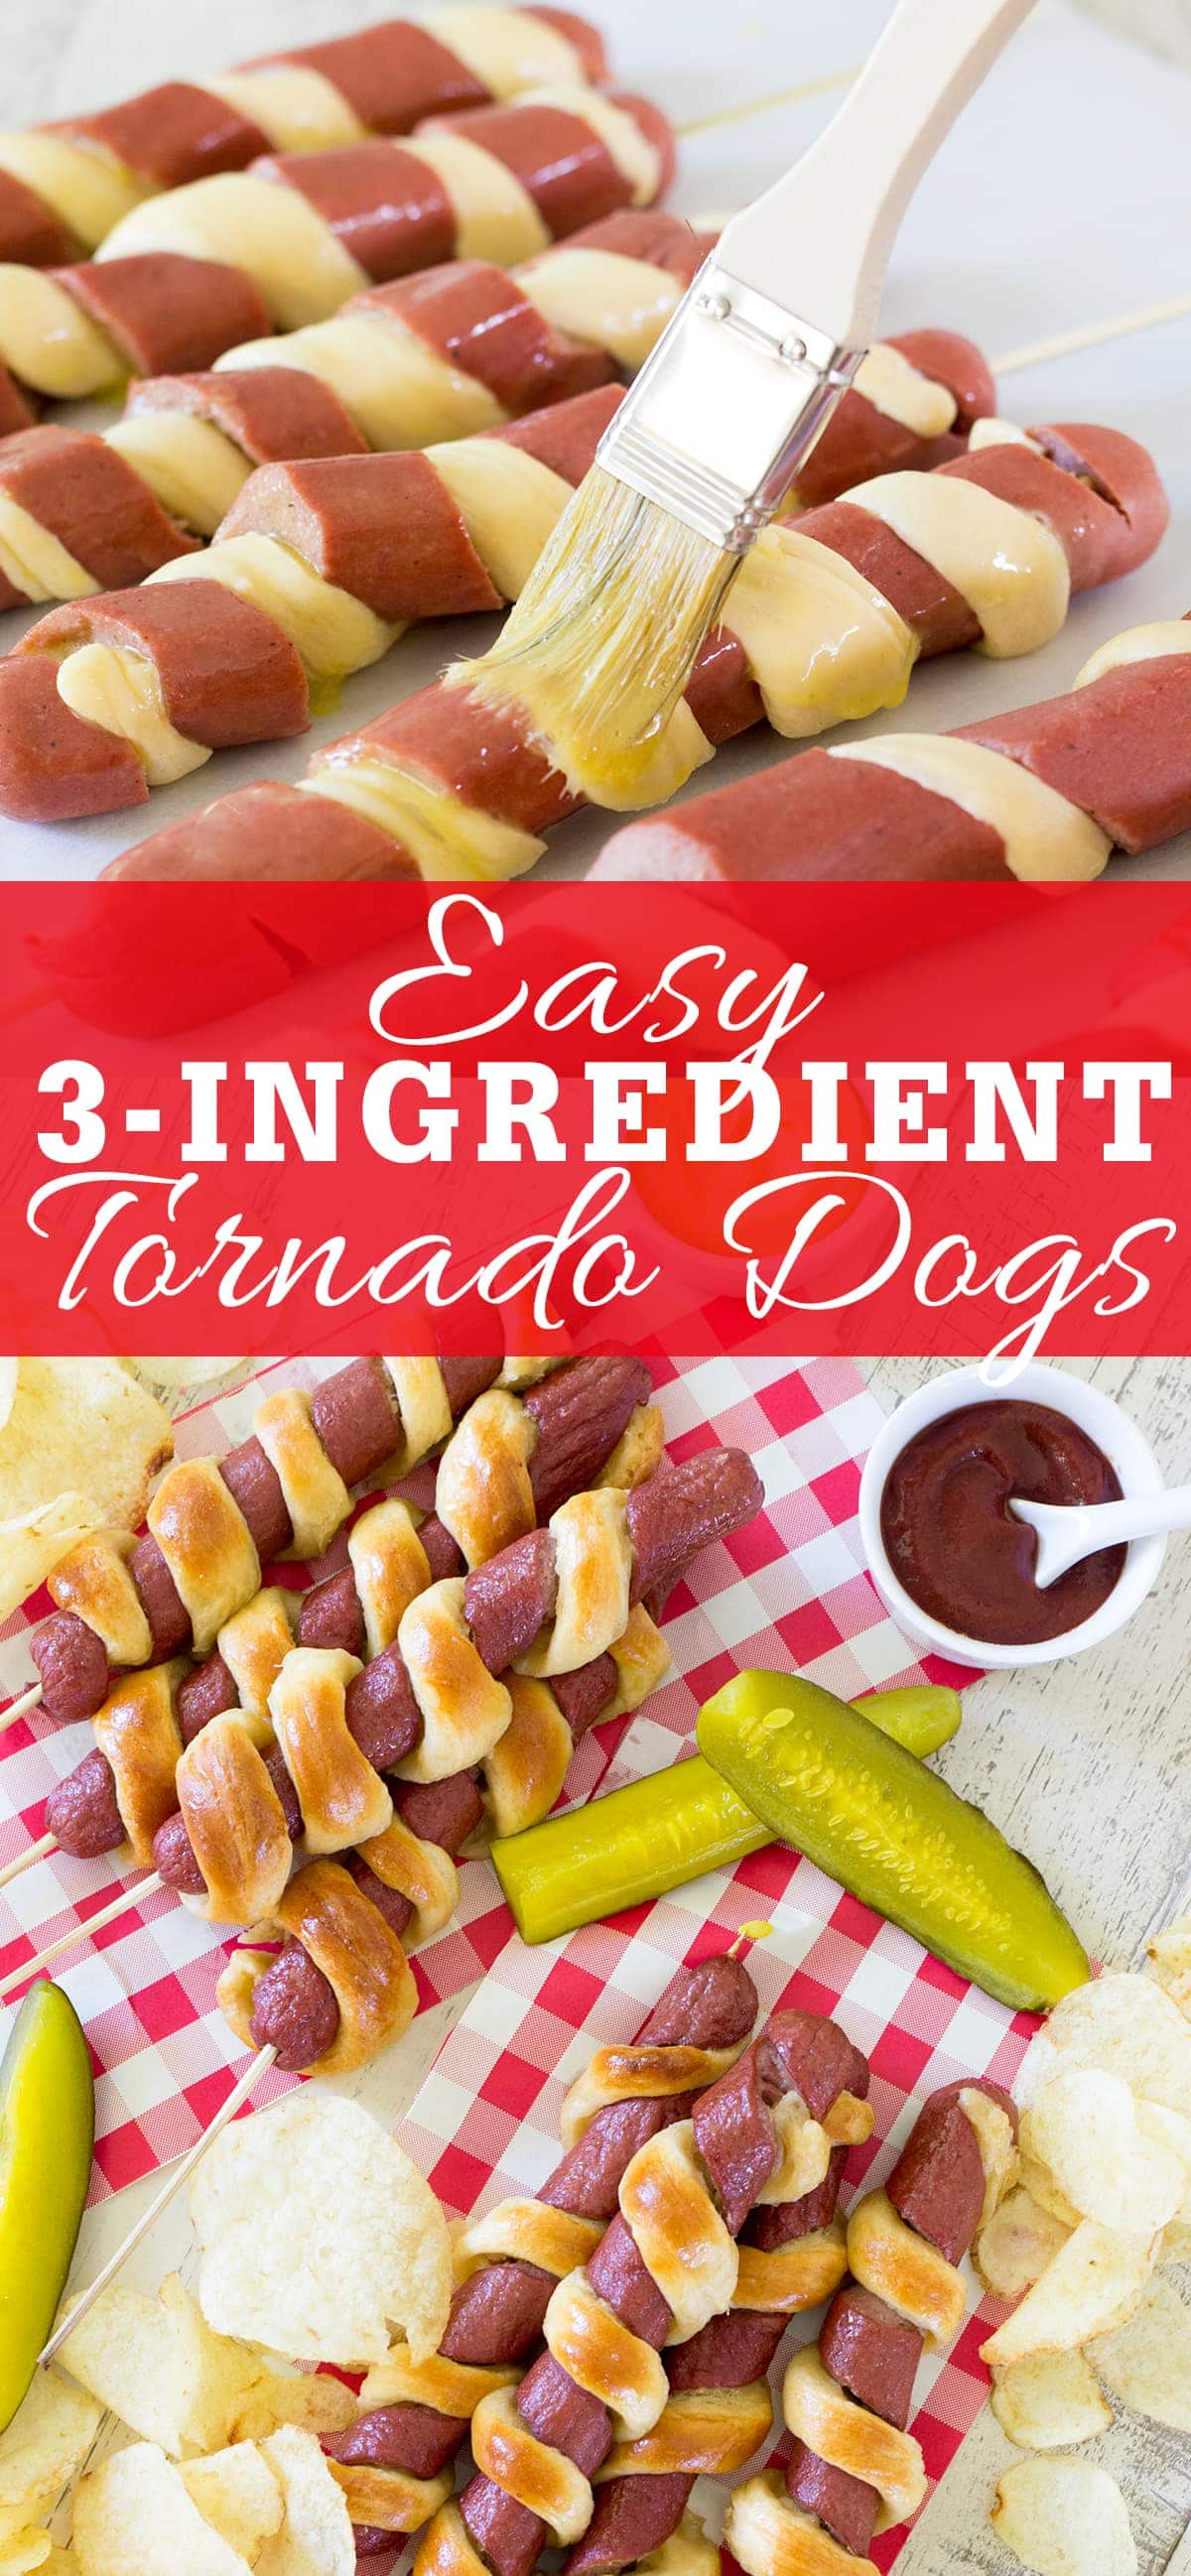 Easy 3-Ingredient Tornado Hot Dogs, spiral cut hot dogs wrapped in crescent roll dough, are an easy and fun way to prepare hot dogs for the 4th of July or anytime of year! 